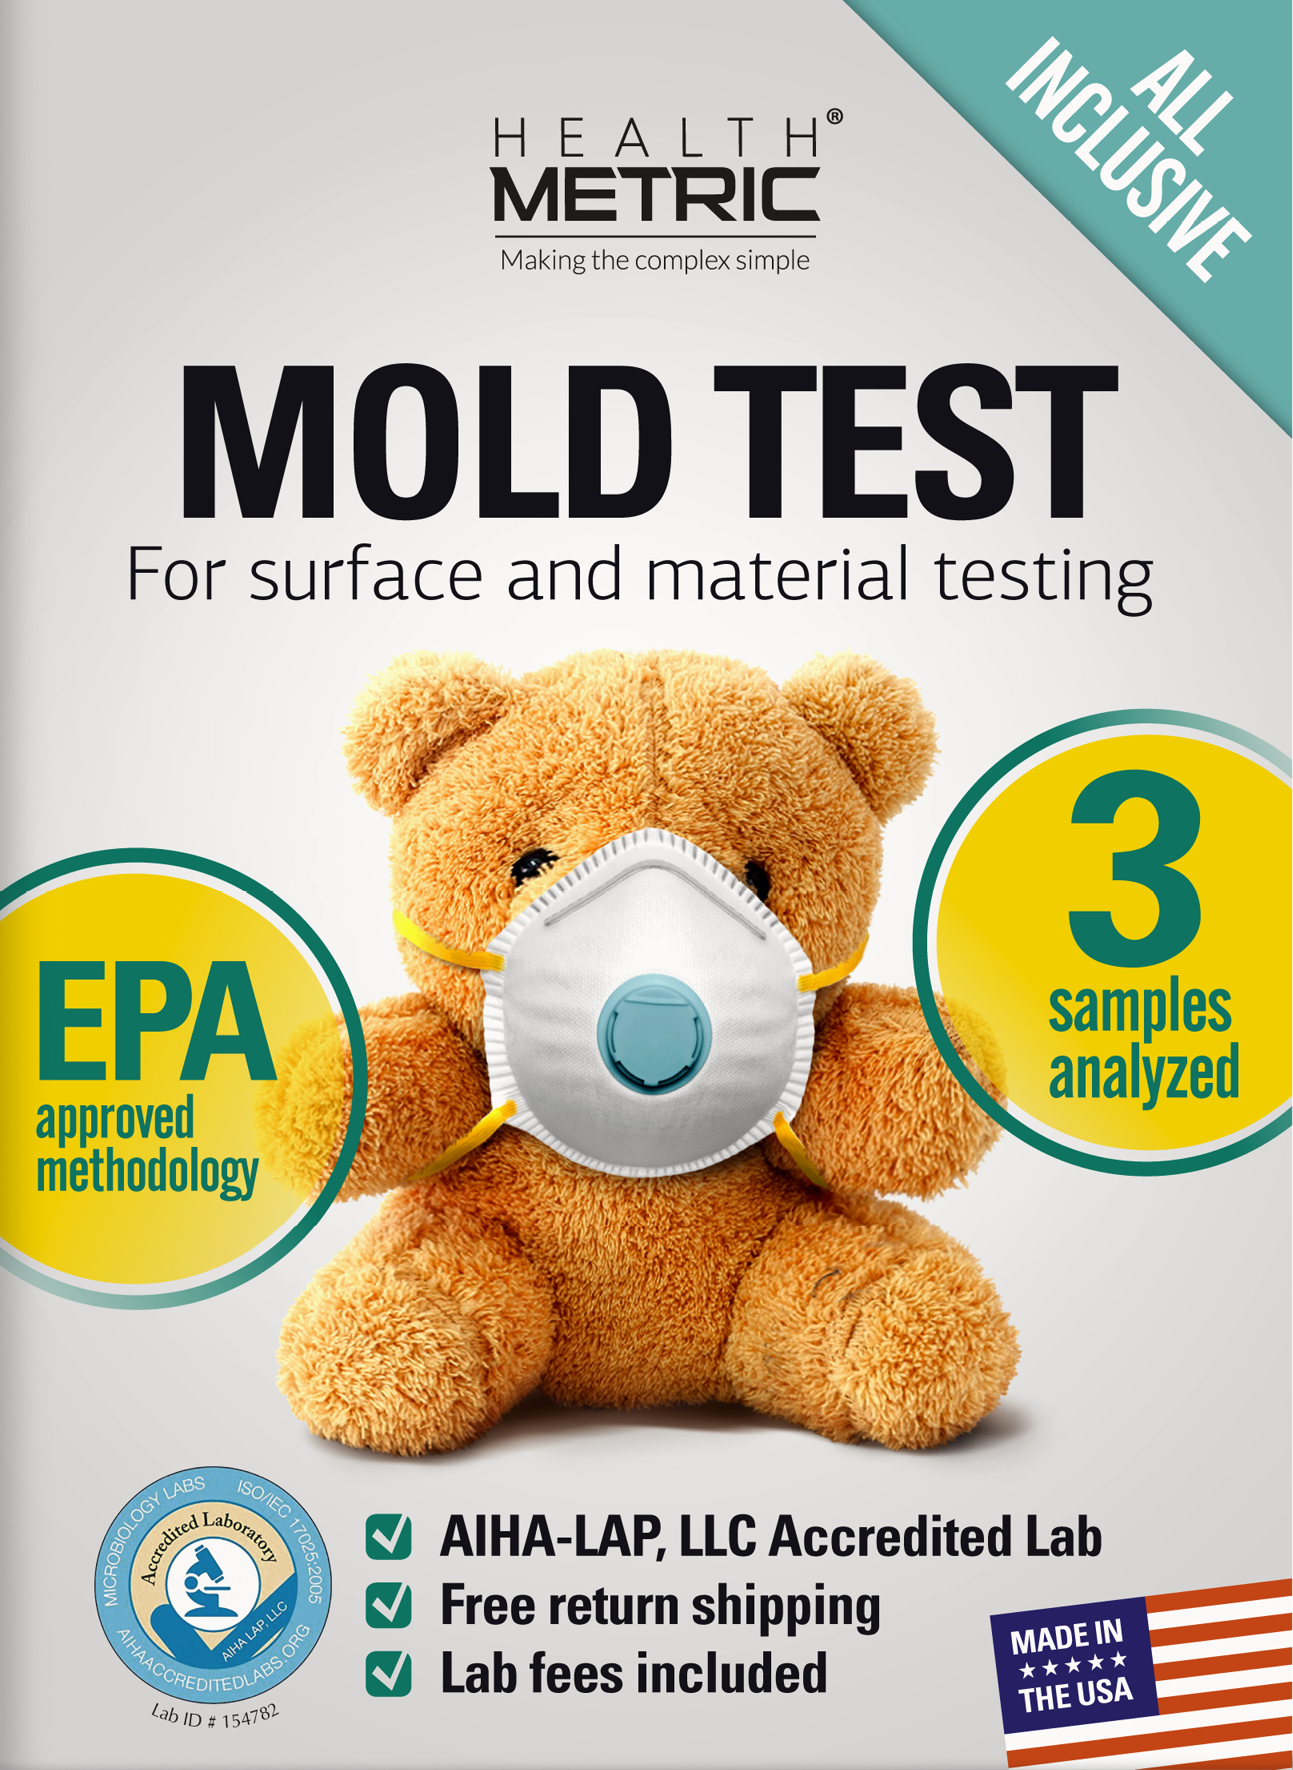 Mold Test Kit for Home - Includes free return shipping and Lab Analysis for 3 samples